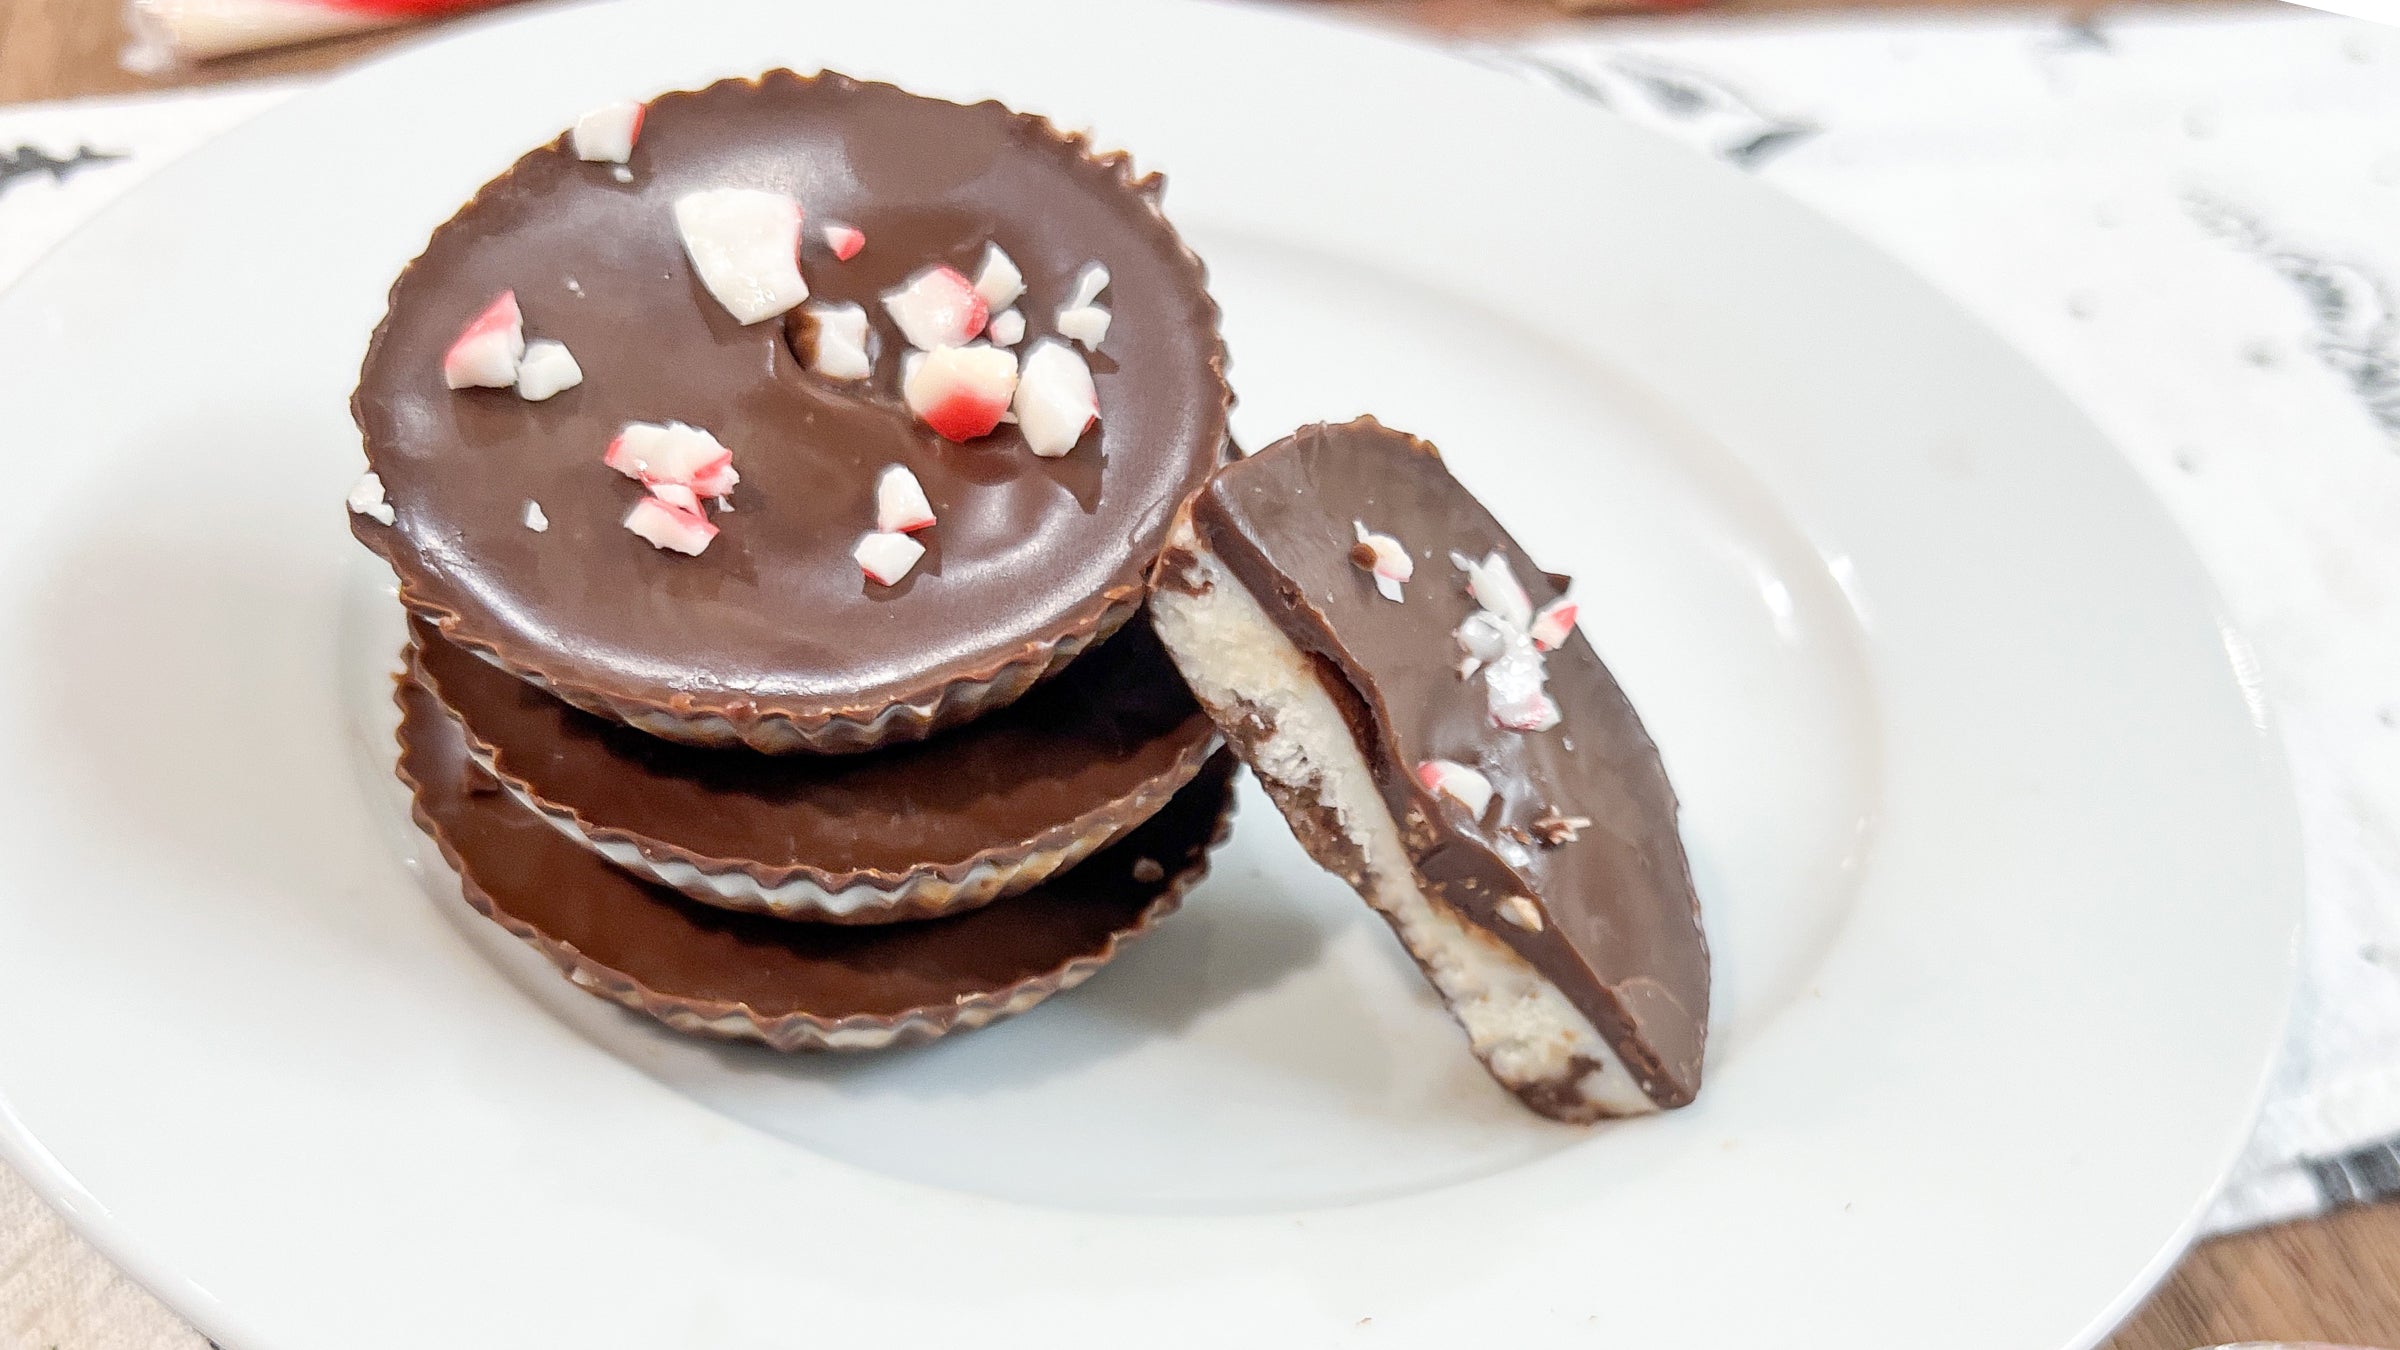 A stack of four chocolate peppermint patties on a white dish